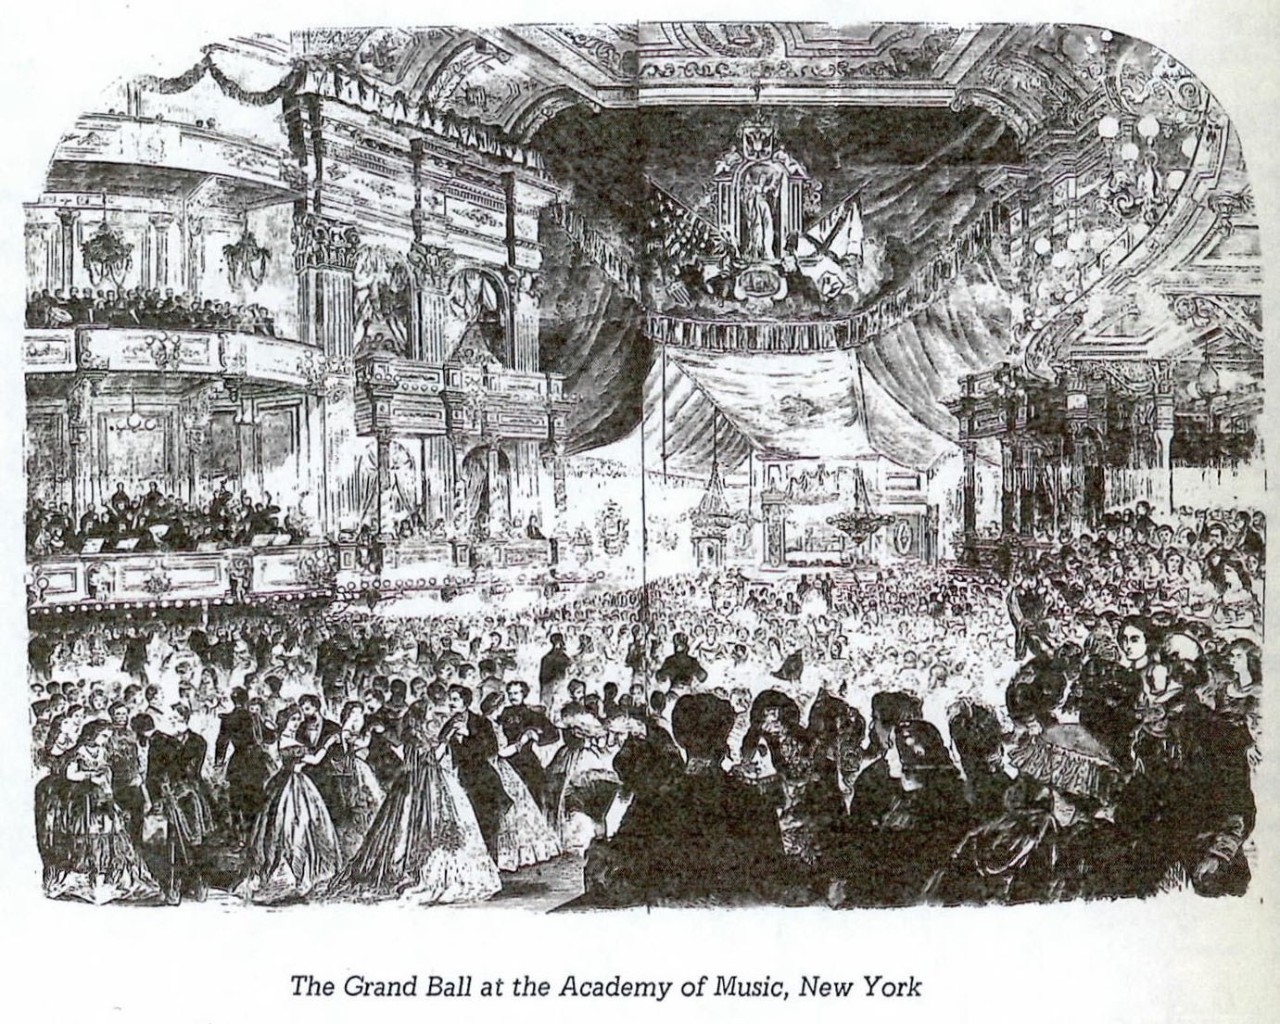 The Grand Ball at the Academy of Music, New York